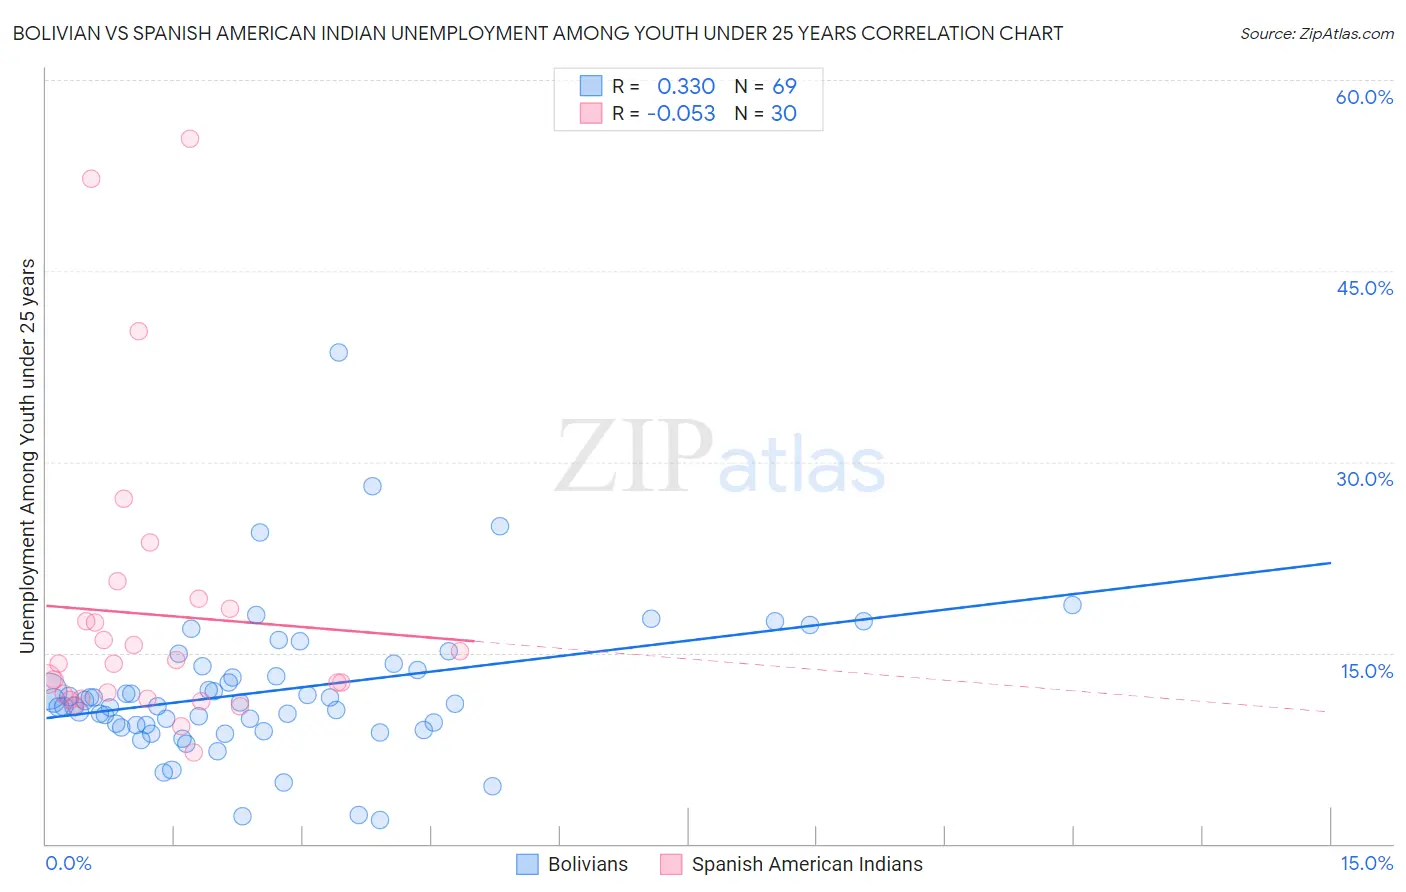 Bolivian vs Spanish American Indian Unemployment Among Youth under 25 years